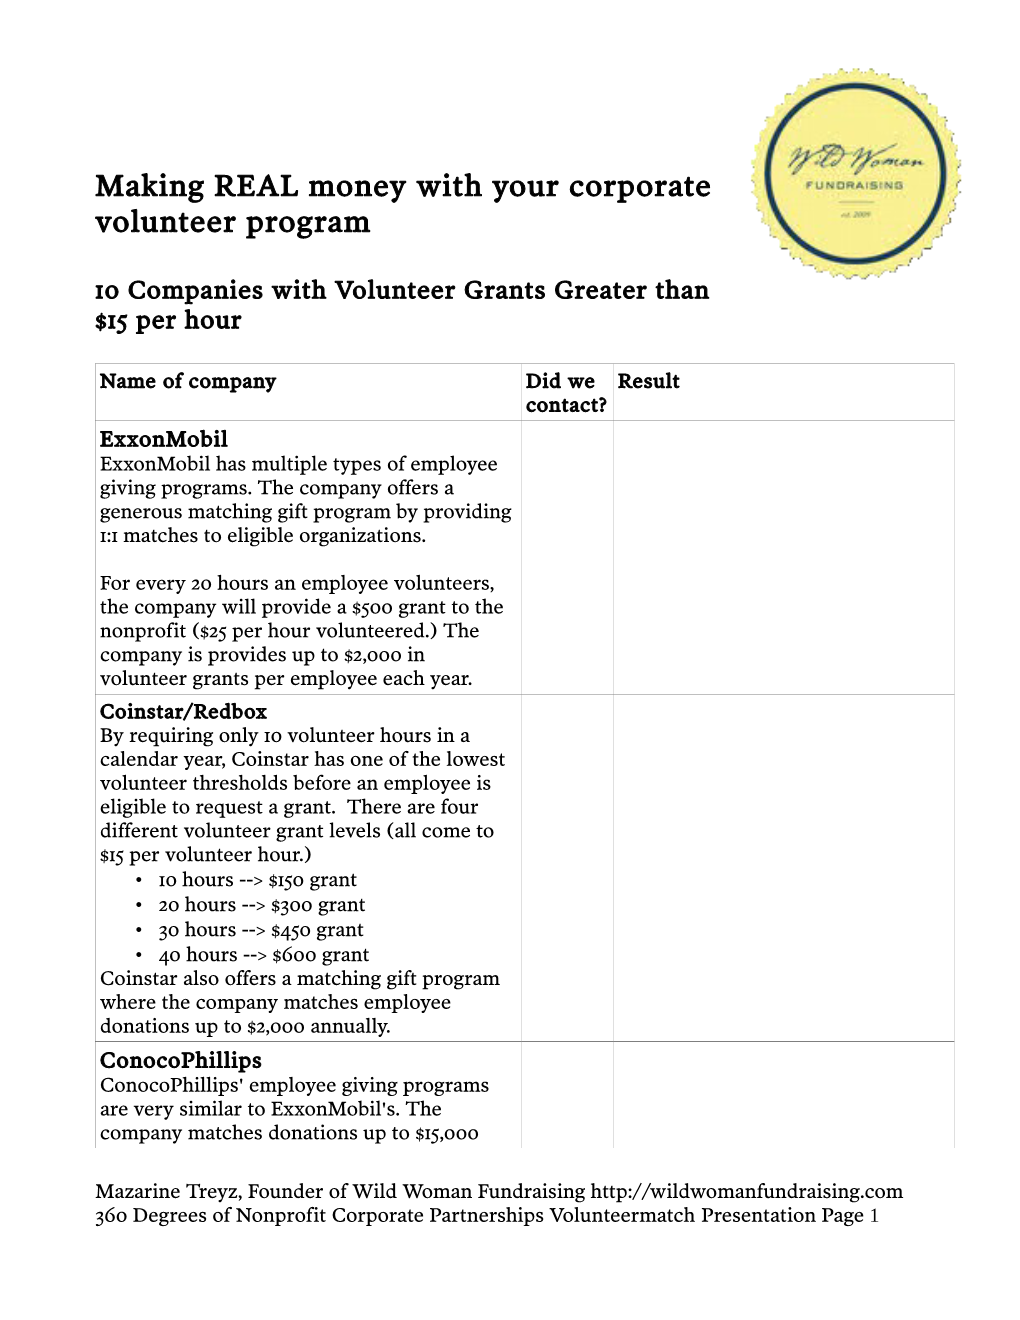 Making REAL Money with Your Corporate Volunteer Program